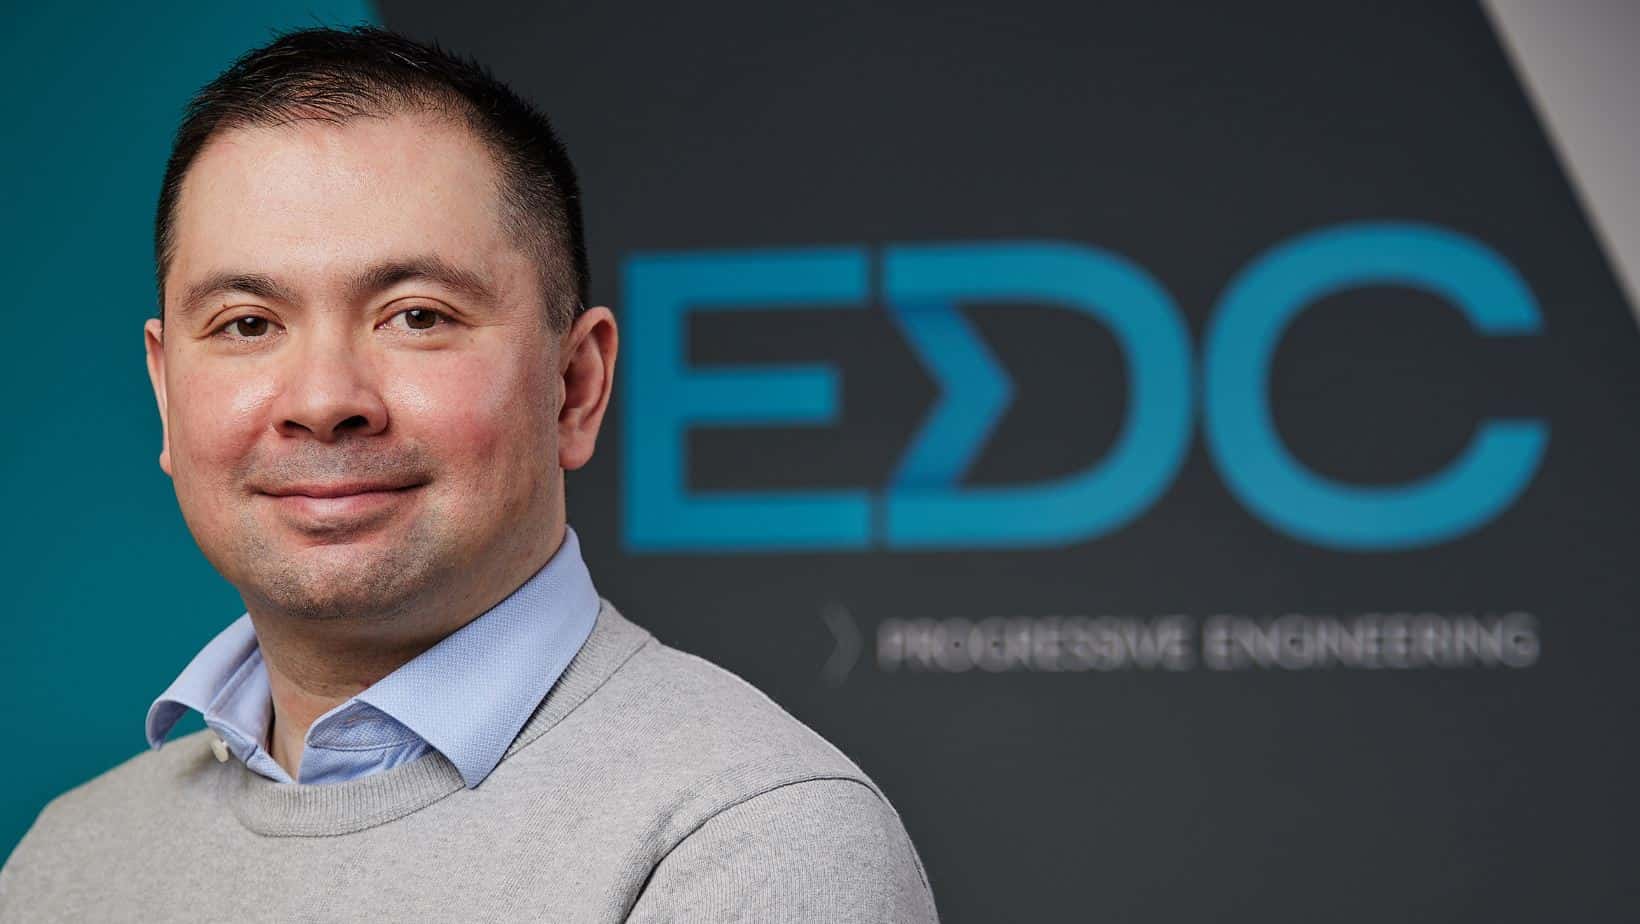 Headshot of Richard Coughlan, newly appointed Group Commercial Director at EDC.